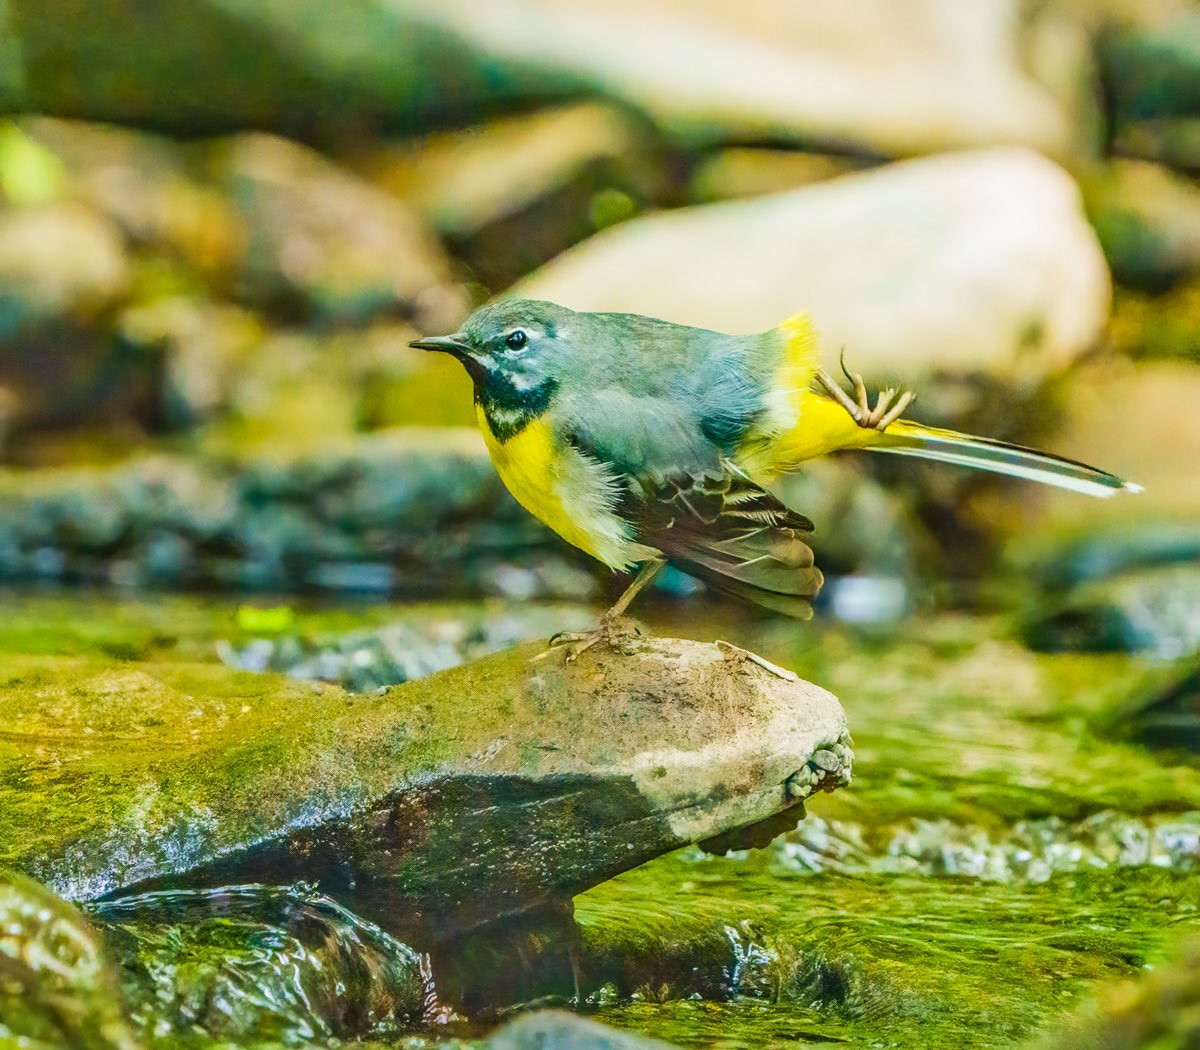 Grey Wagtail with early morning yoga routine @thetimes @snapagency #BBCWildlifePOTD #TwitterNaturePhotography #birding #NaturePhotography #birding